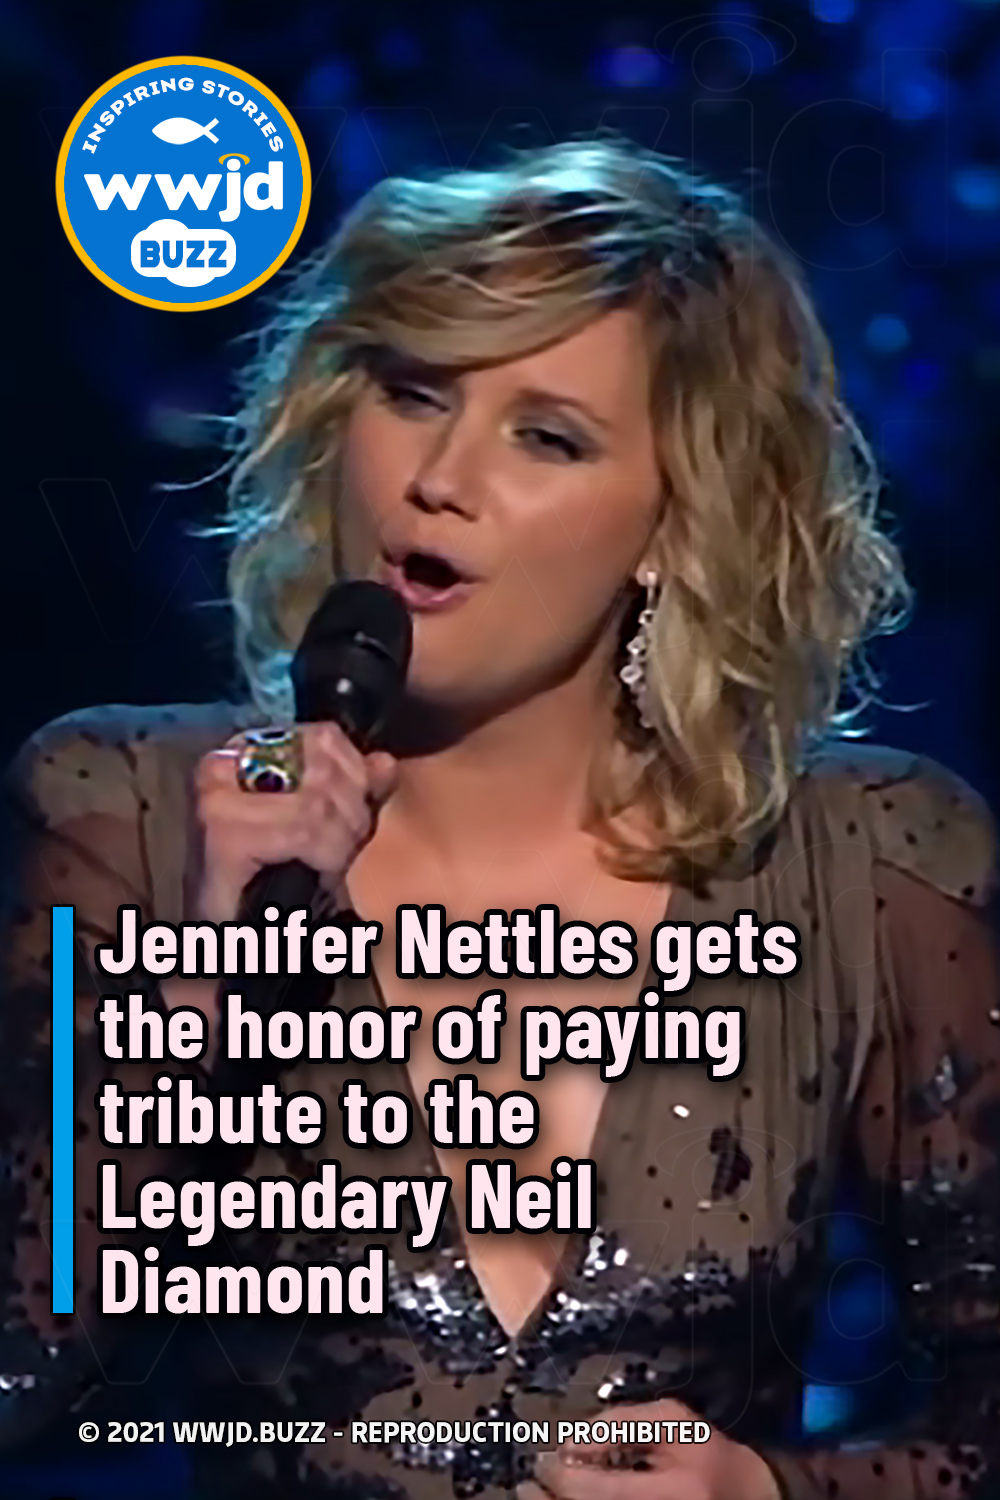 Jennifer Nettles gets the honor of paying tribute to the Legendary Neil Diamond